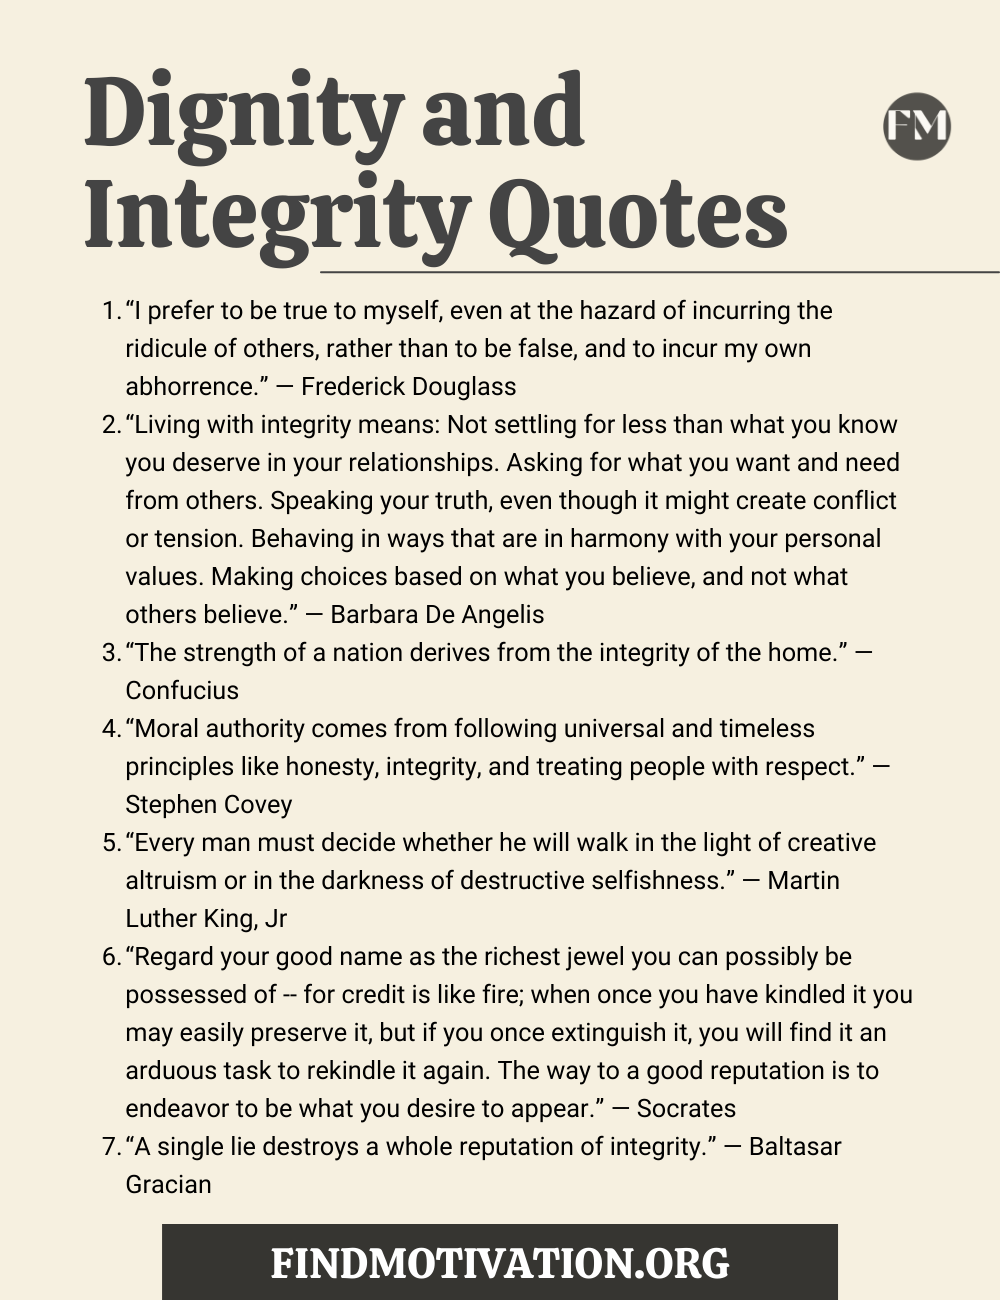 Dignity and Integrity Quotes